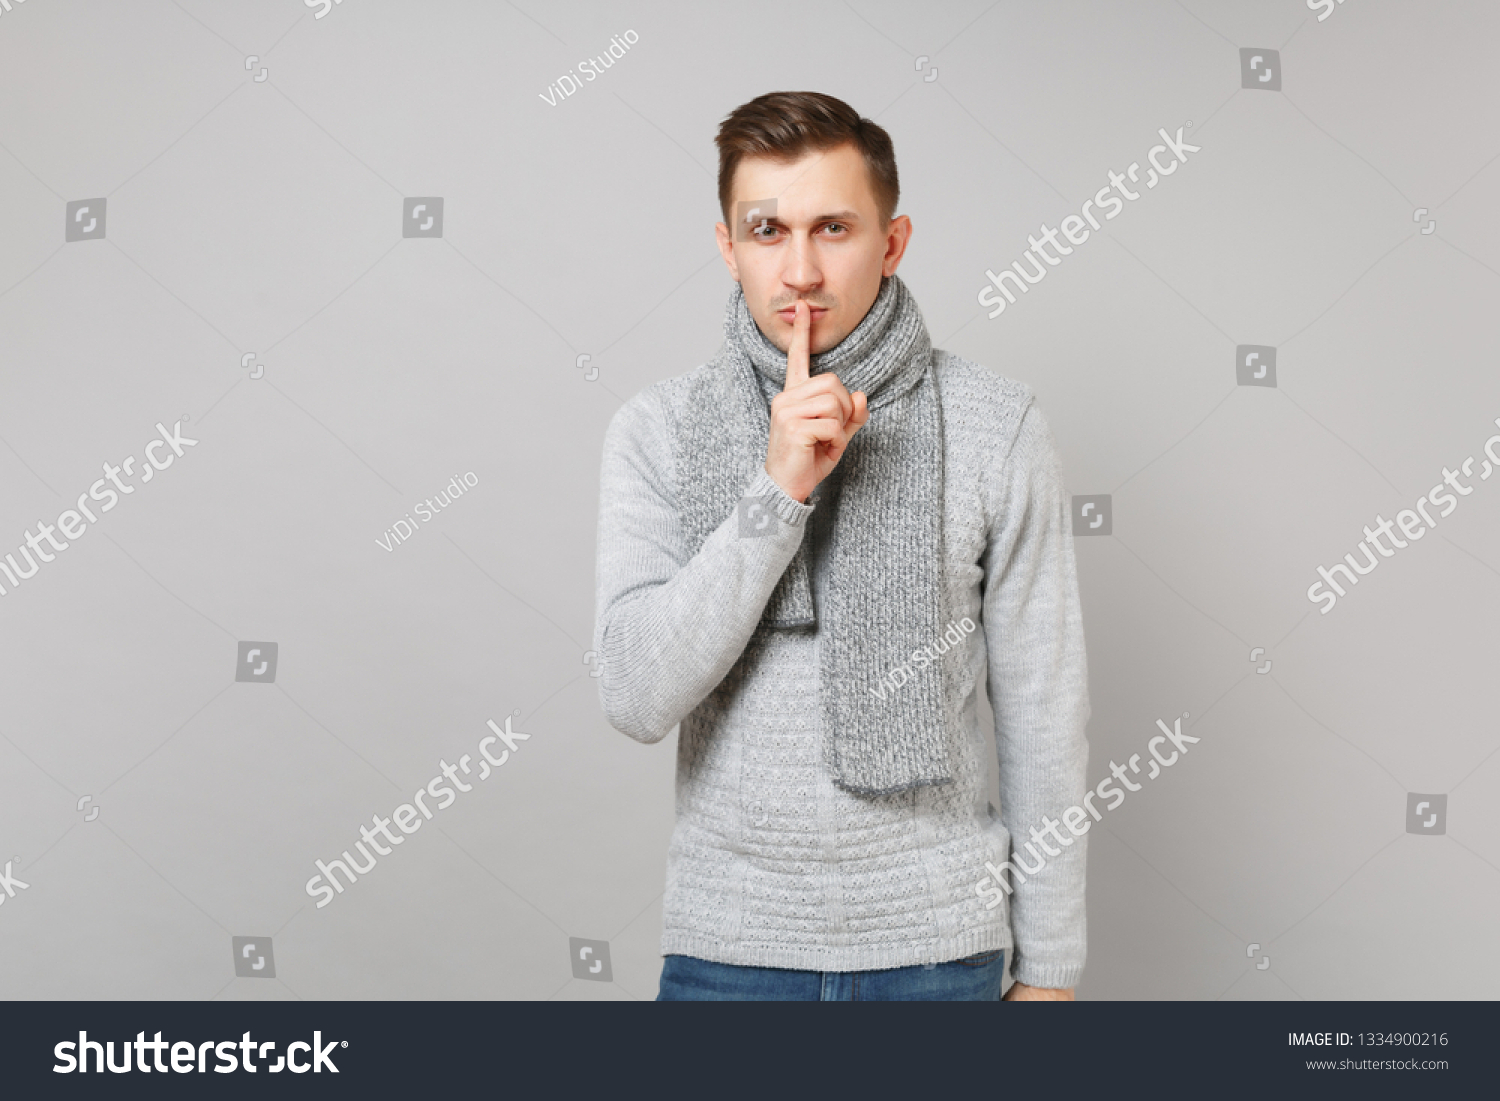 Young man in gray sweater, scarf saying hush be quiet with finger on lips shhh gesture isolated on grey background. Healthy lifestyle, people sincere emotions, cold season concept. Mock up copy space #1334900216